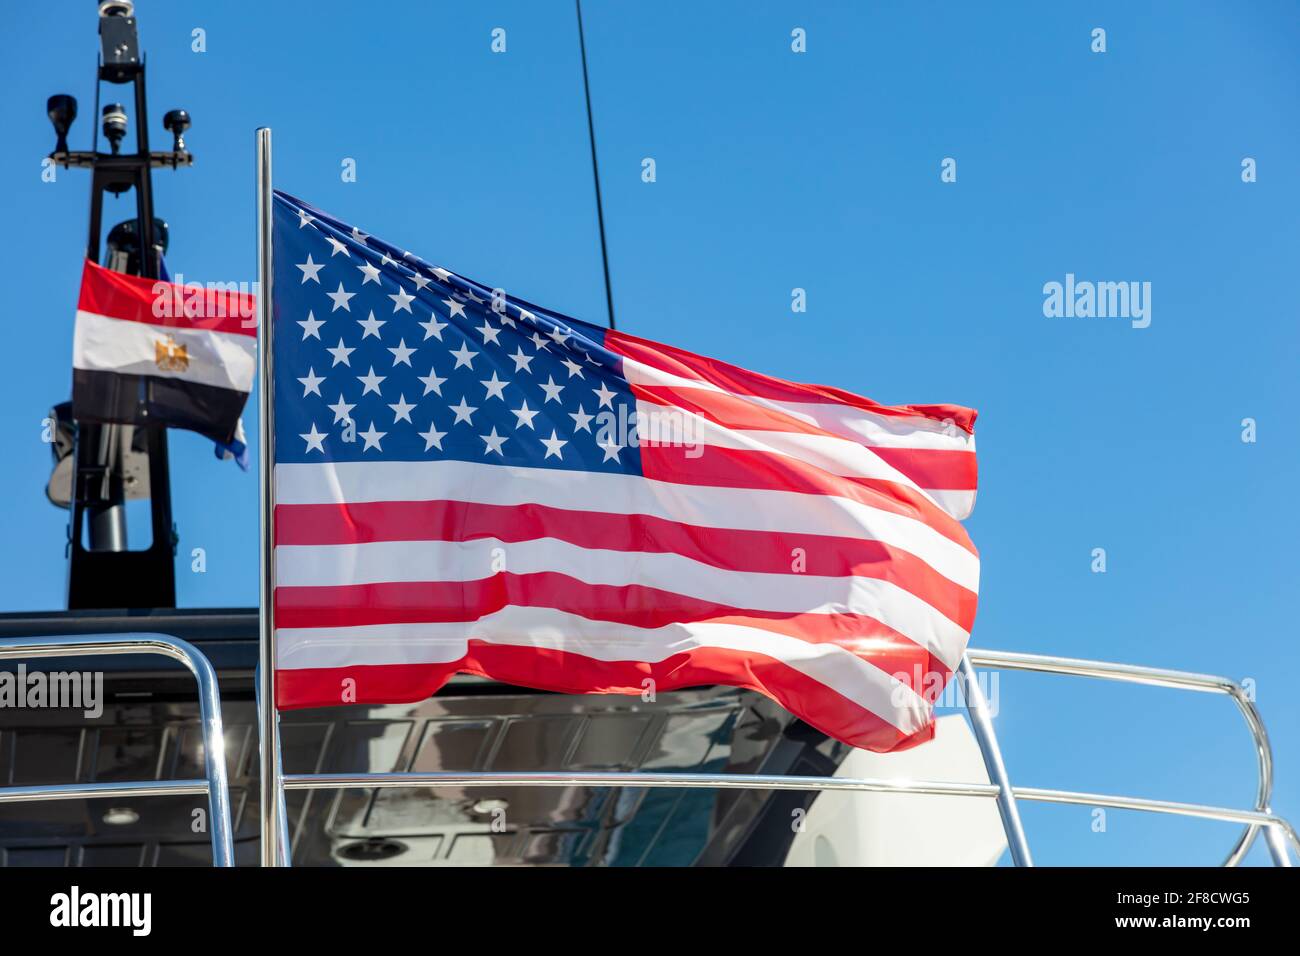 United states of America flag waving on yacht stern. Luxury boat moored at marina in Athens Greece. Blue sky background, close up view. Stock Photo